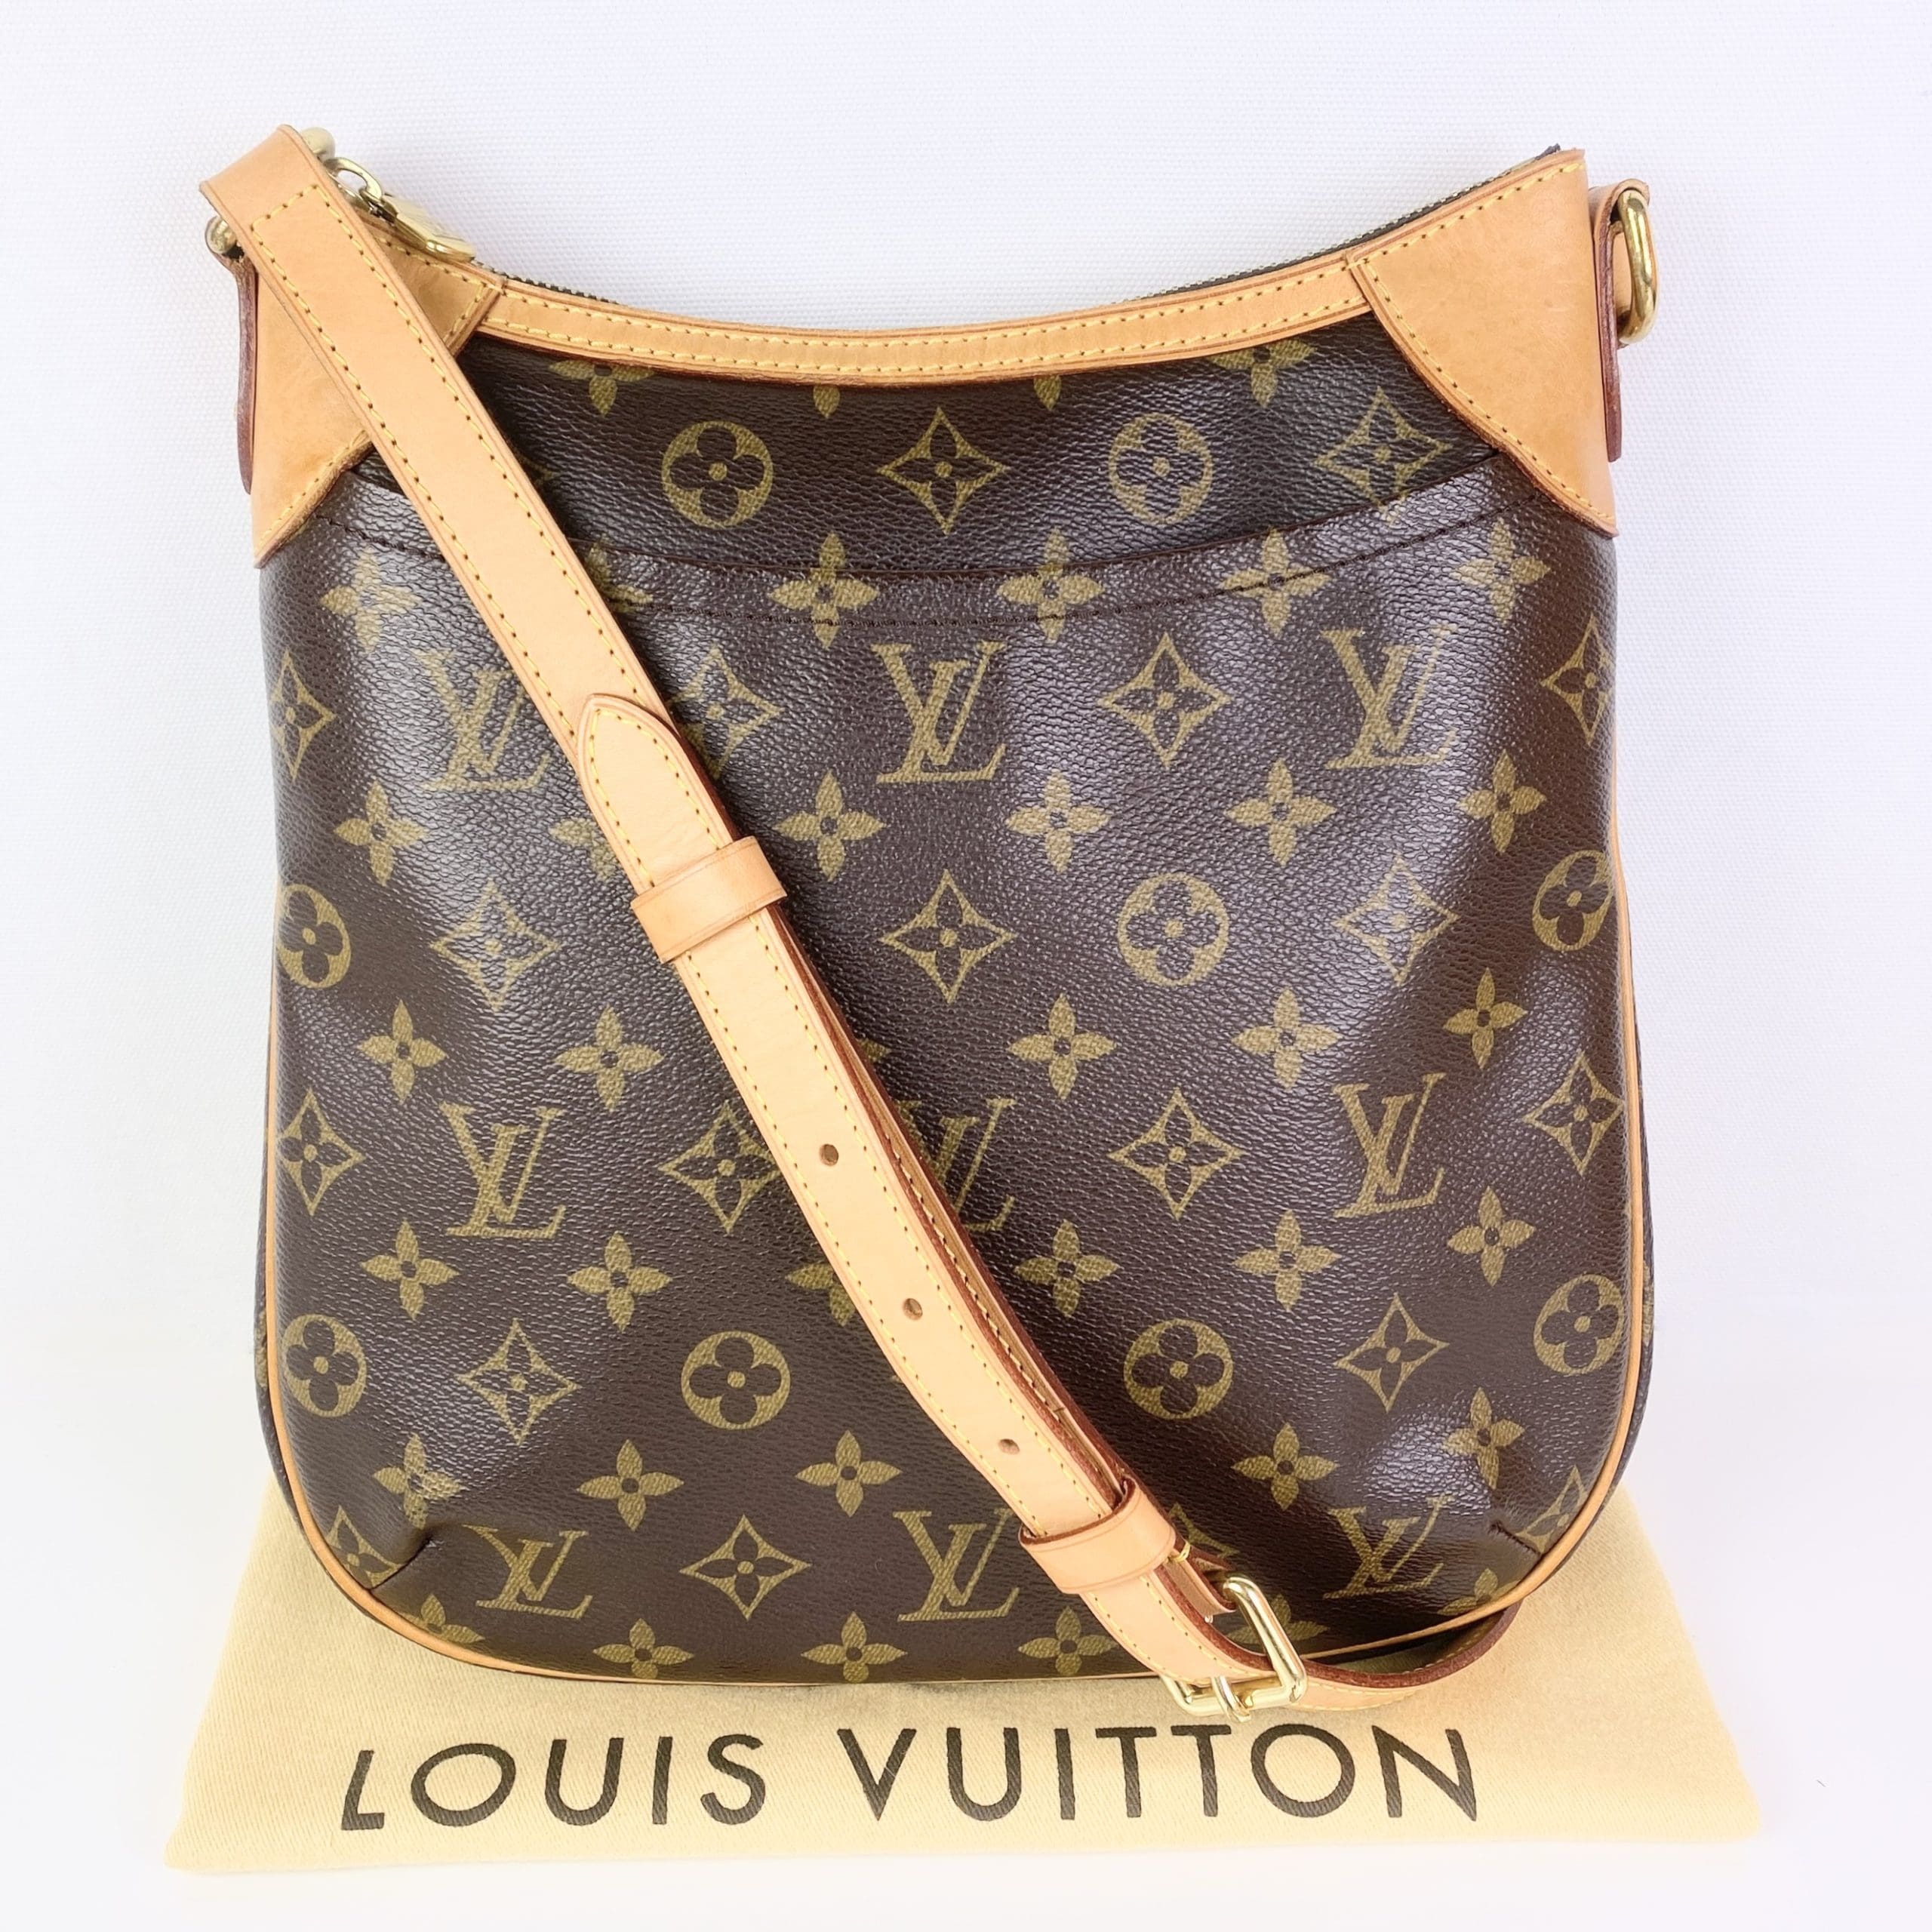 Louis Vuitton Odeon PM JUST BOUGHT IT FROM THE REAL REAL. in 2023